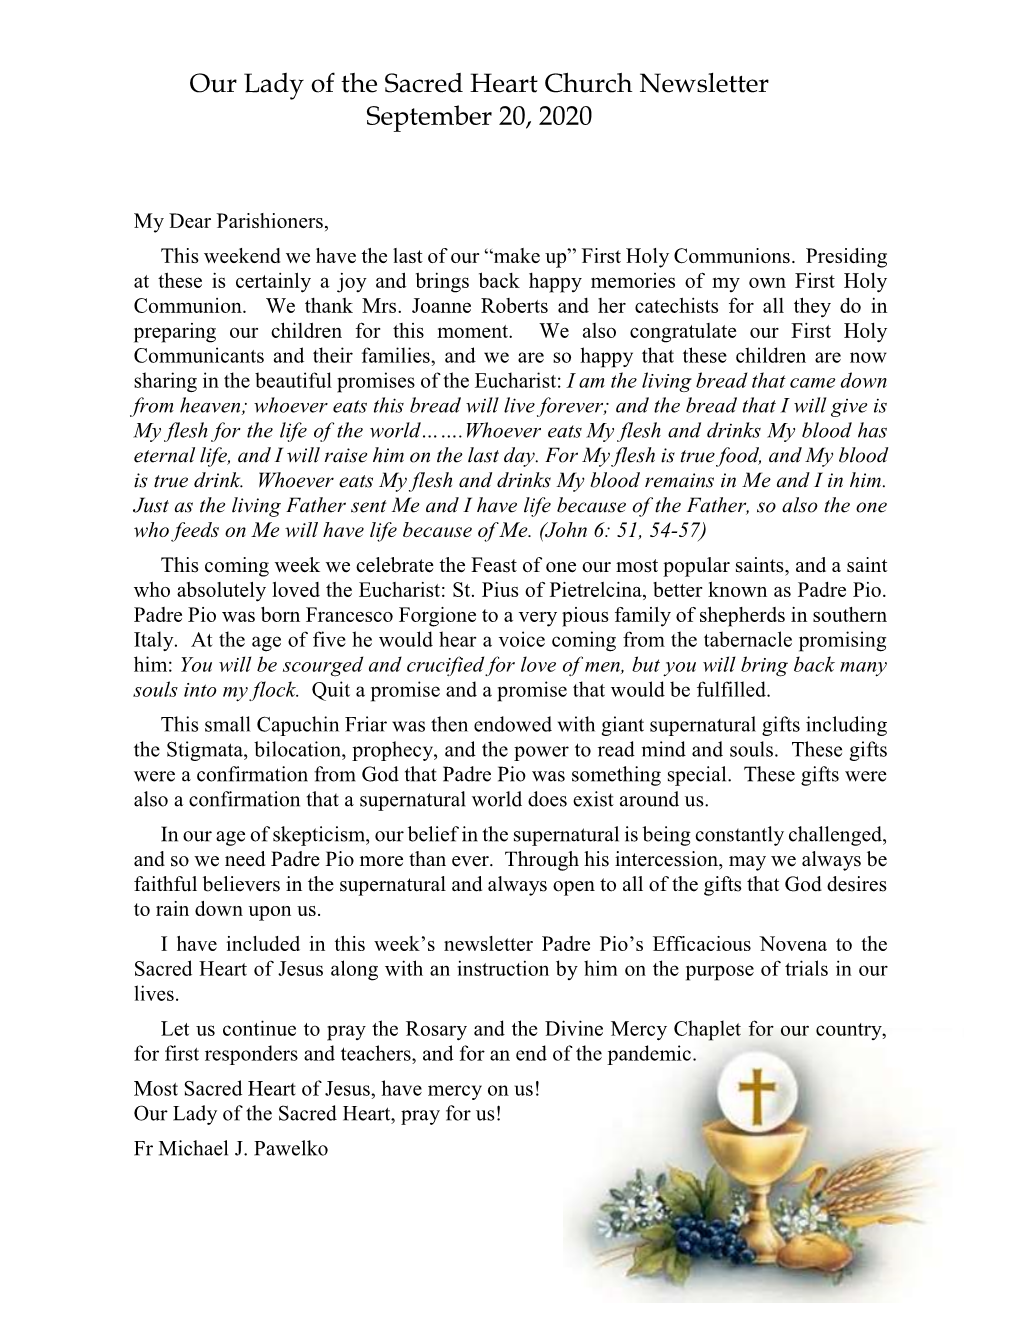 Our Lady of the Sacred Heart Church Newsletter September 20, 2020